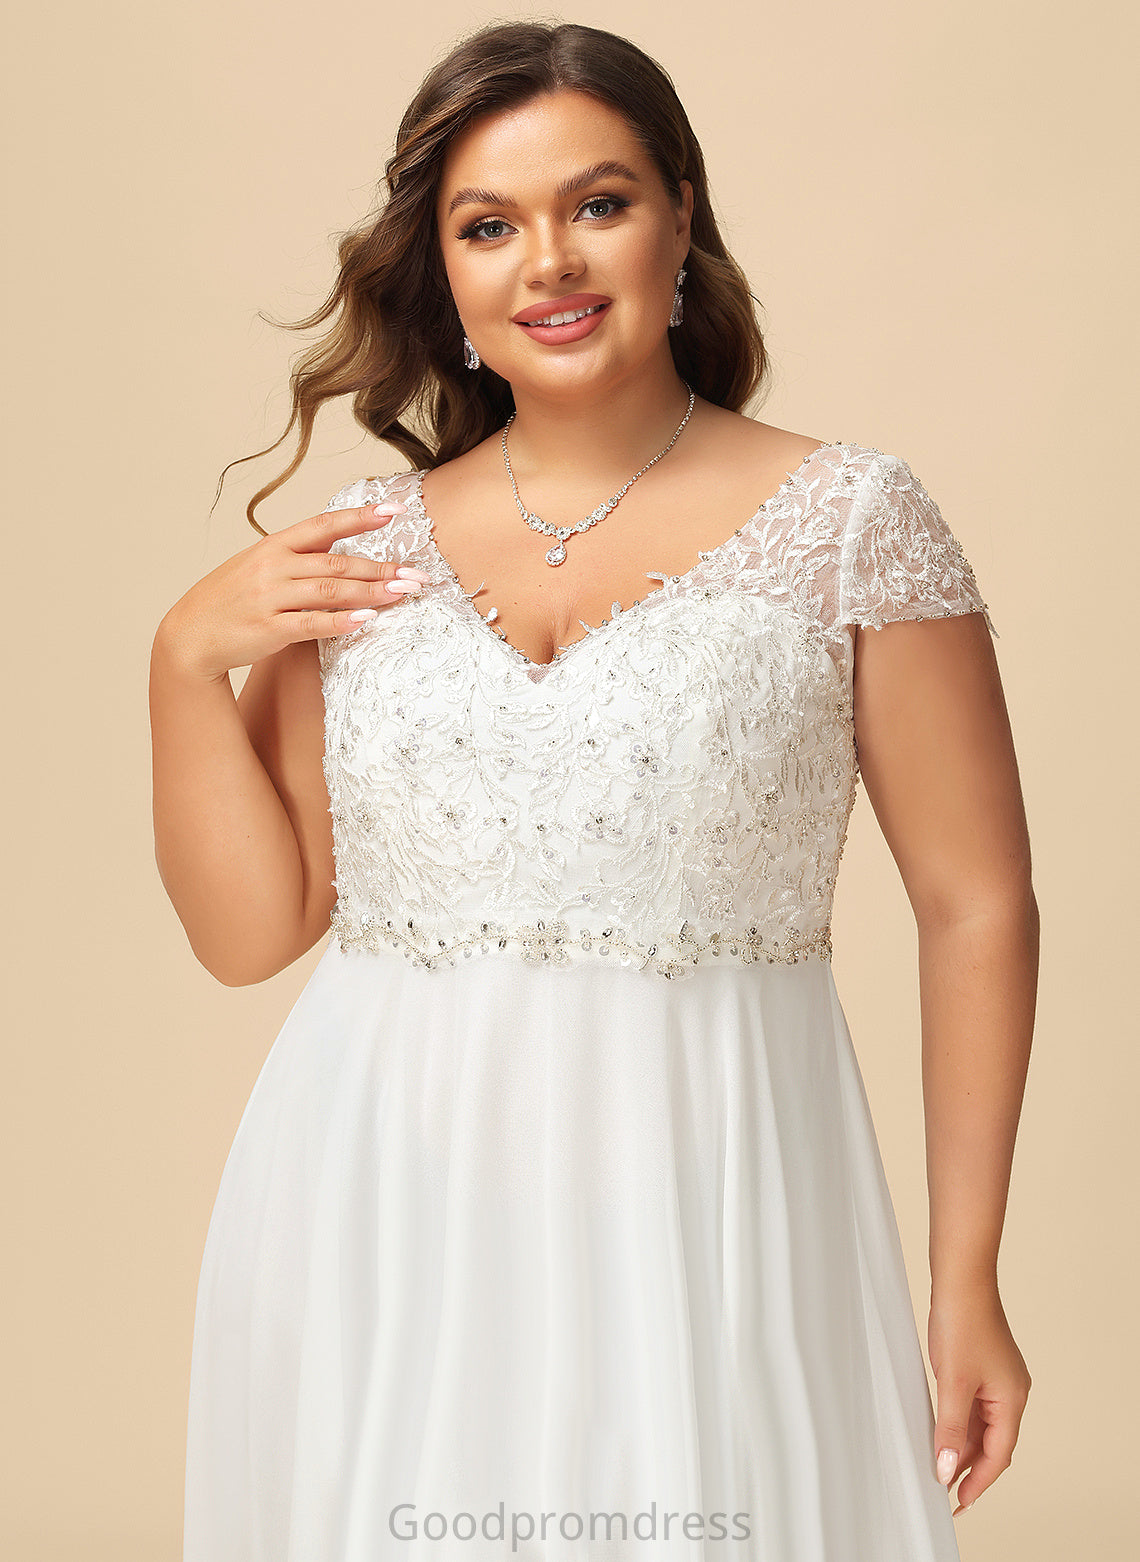 Lace Beading Wedding Dresses With Wedding Chiffon Dress Charlotte Sequins V-neck Floor-Length A-Line